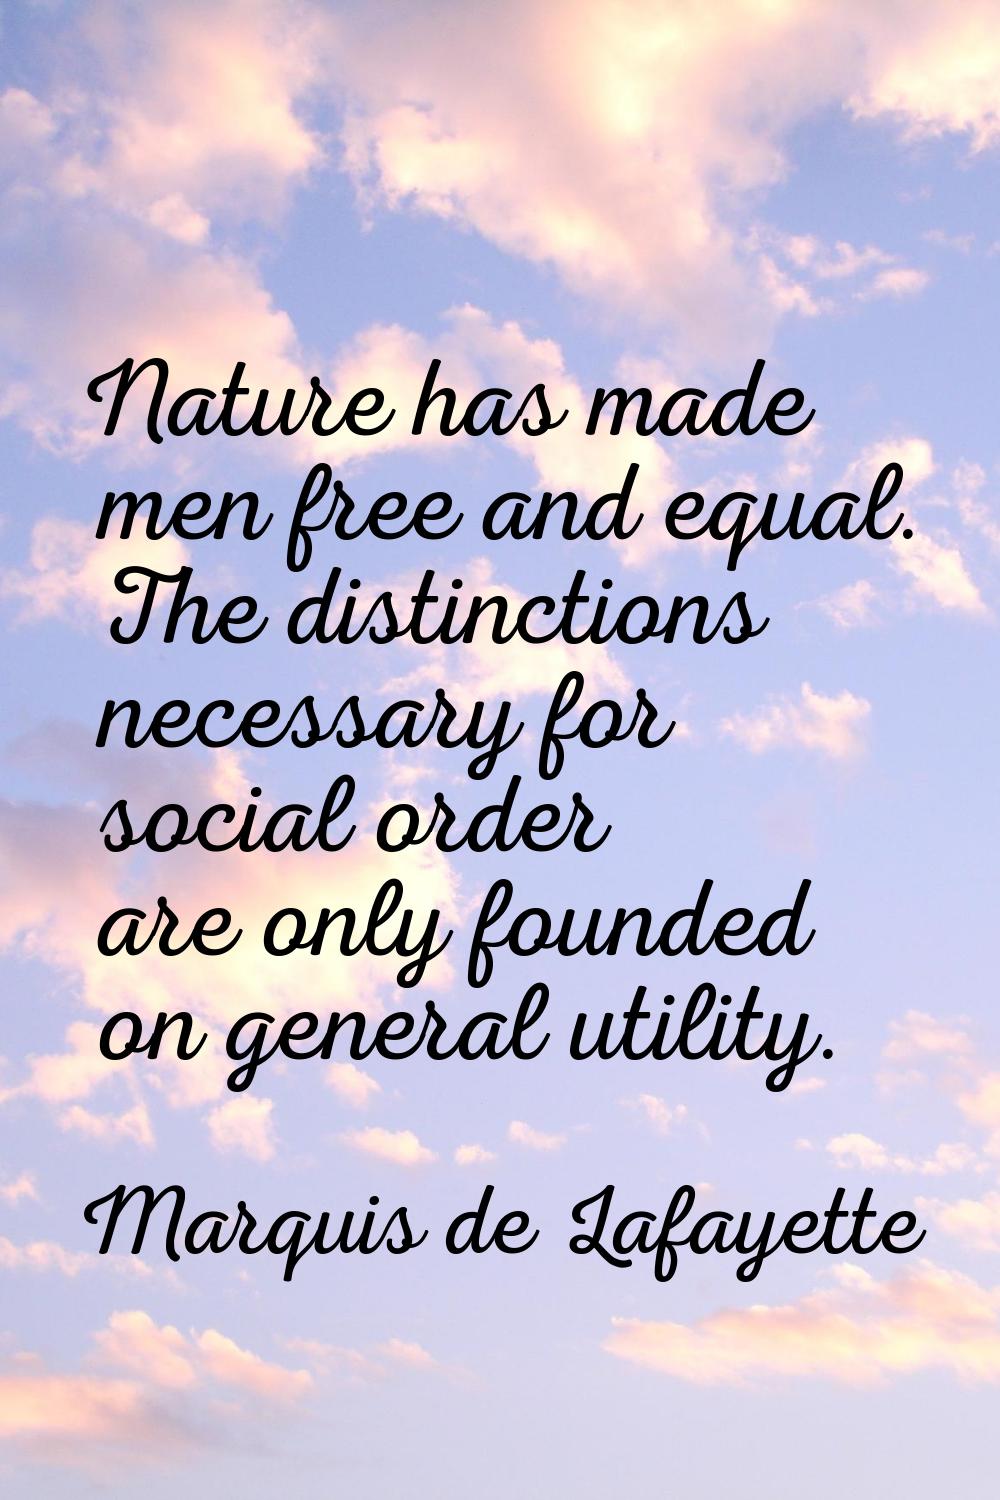 Nature has made men free and equal. The distinctions necessary for social order are only founded on